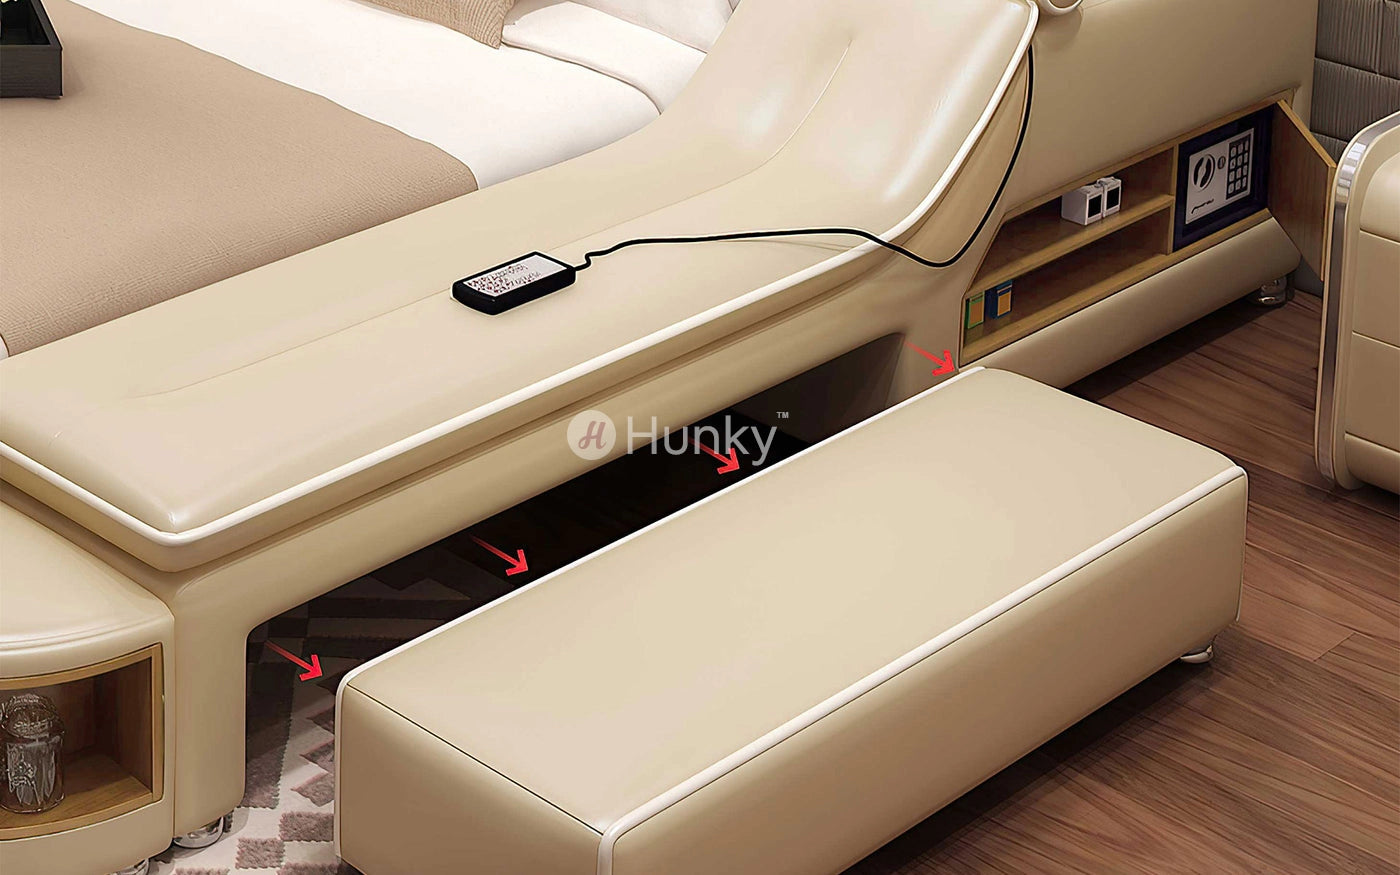 Hunky Multifunctional Modern Smart Bed With Built-In Massage Chair and Bluetooth Speakers